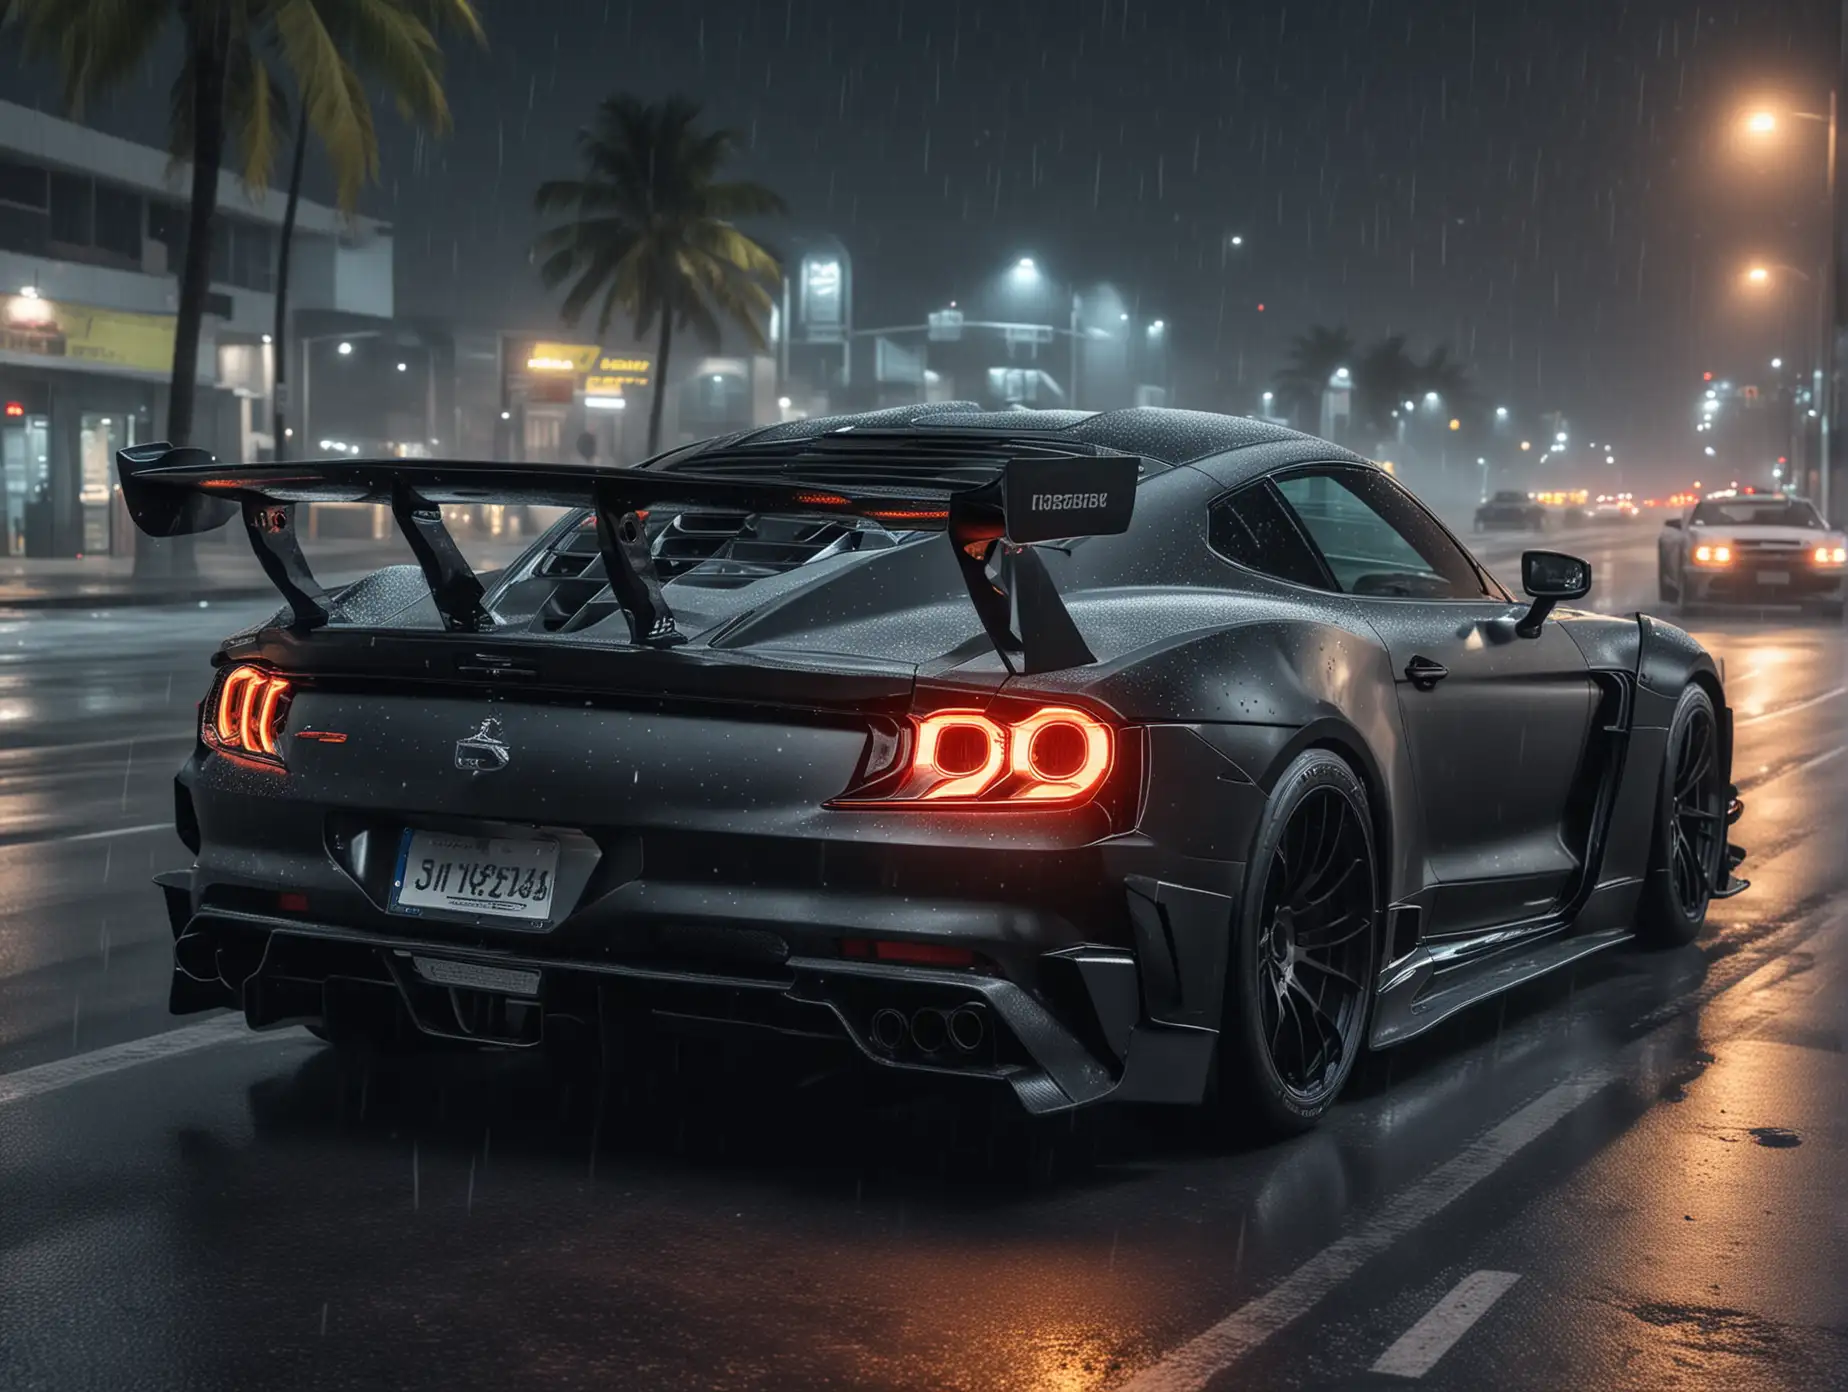 create a super tuning super car from mustang gtr and koenigsegg jesko driving at night on the city miami roads snowing dark color drifting and big tiers, rear View car color dark black add this name (BOO89ED) to number plate